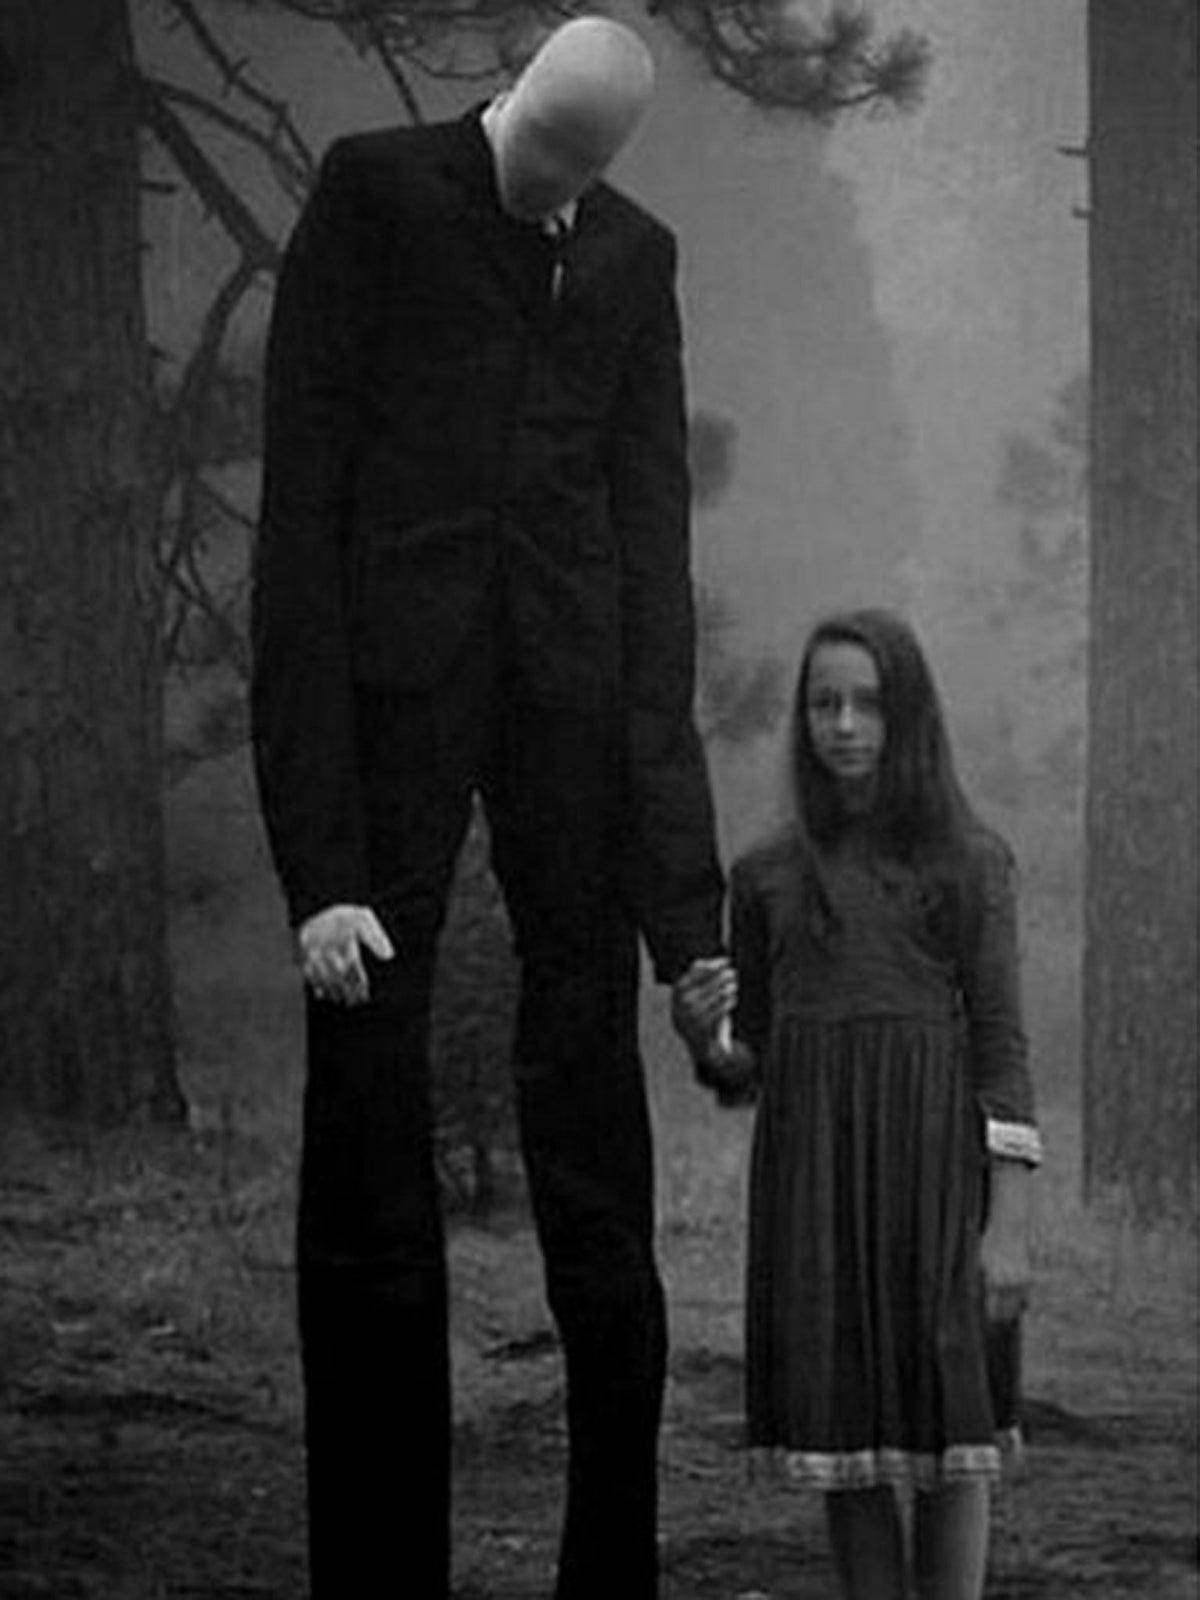 Who is the girl with Slender Man?